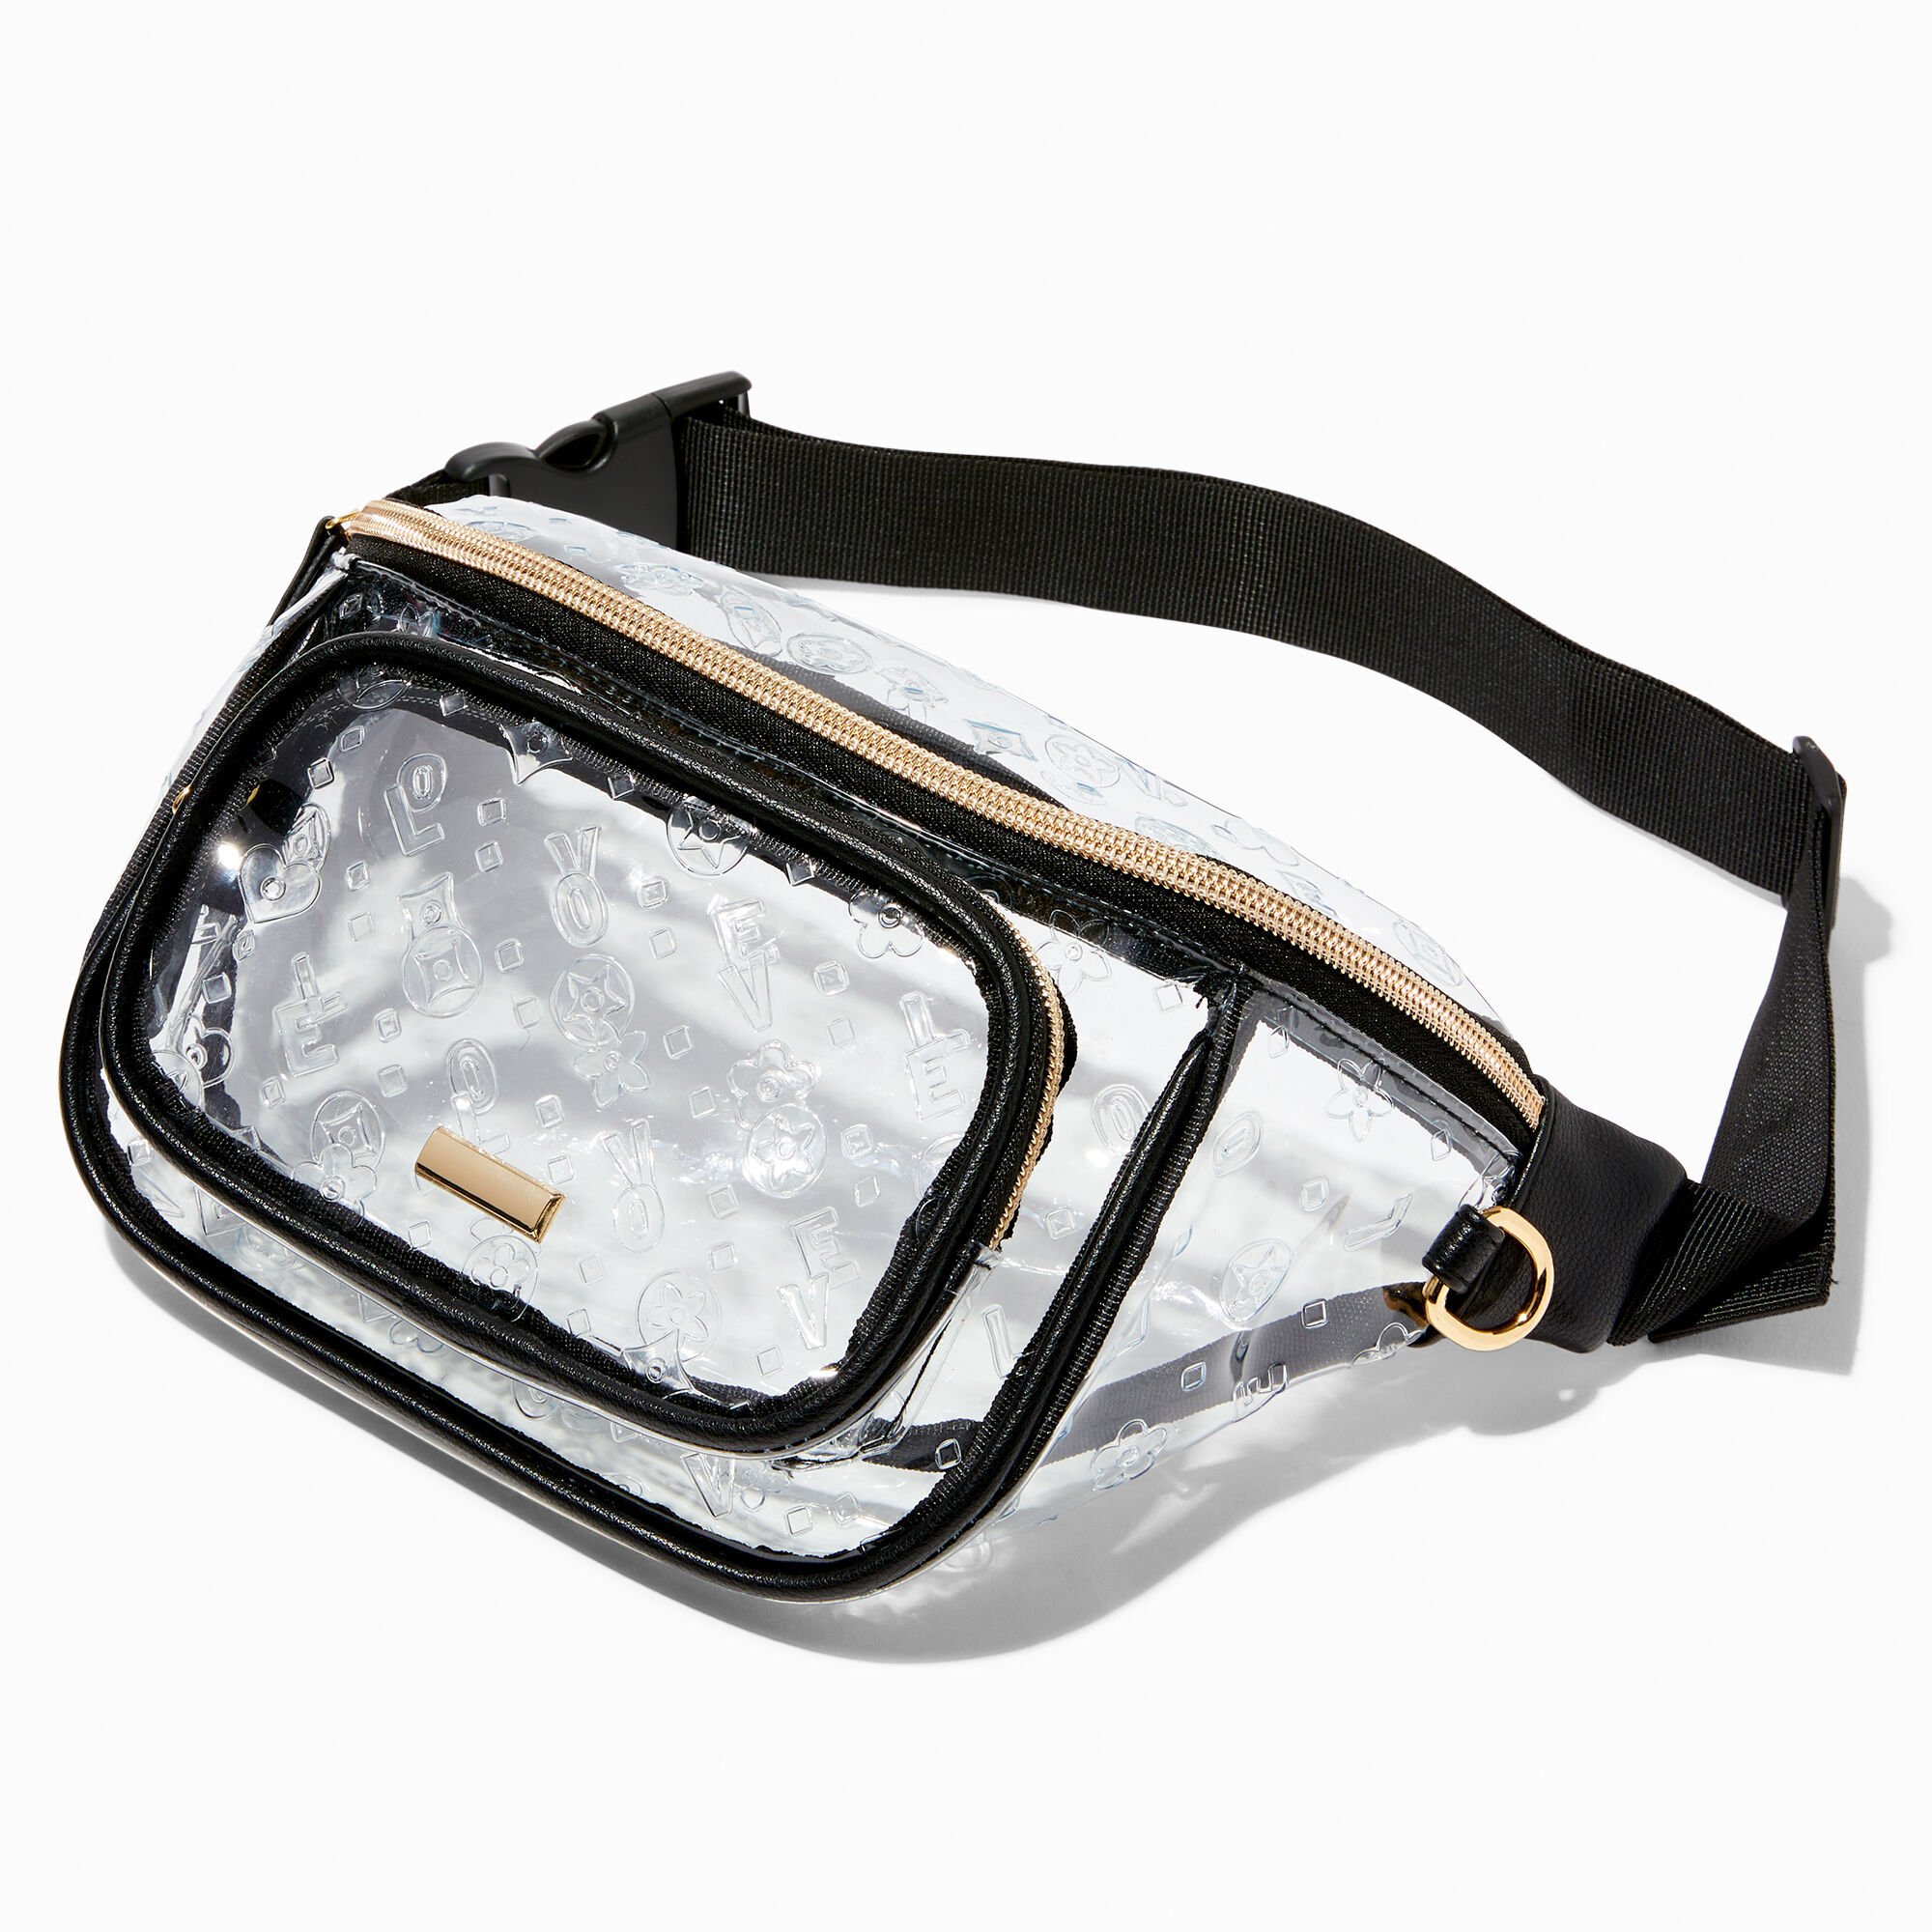 View Claires Status Icons Clear Bum Bag Black information